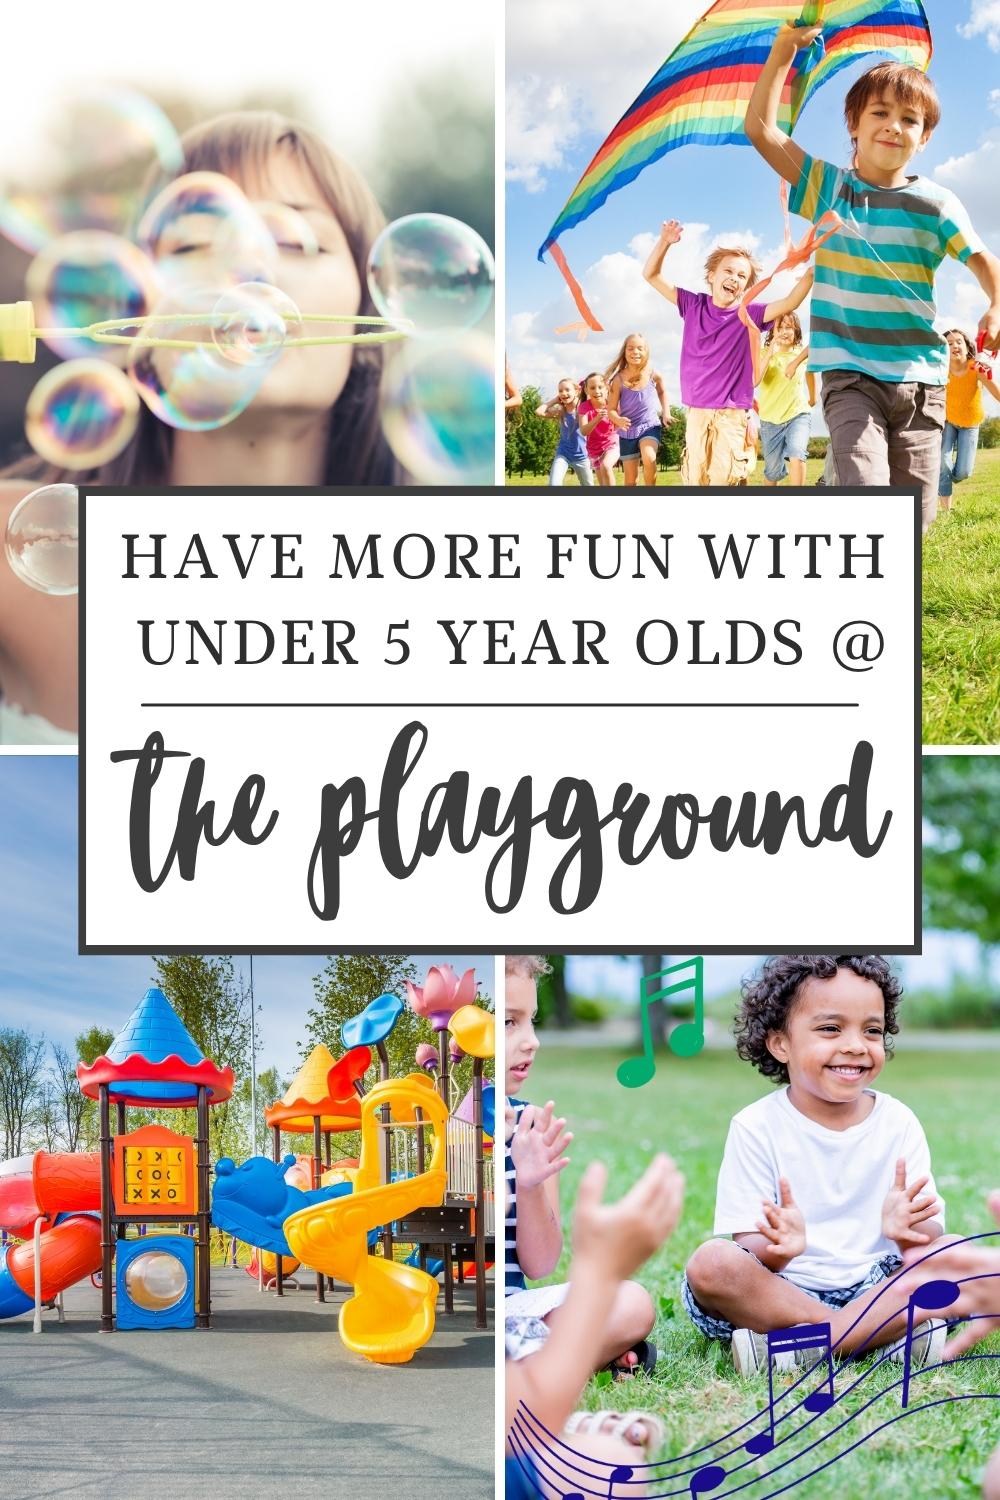 How to Enrich the Playground Experience